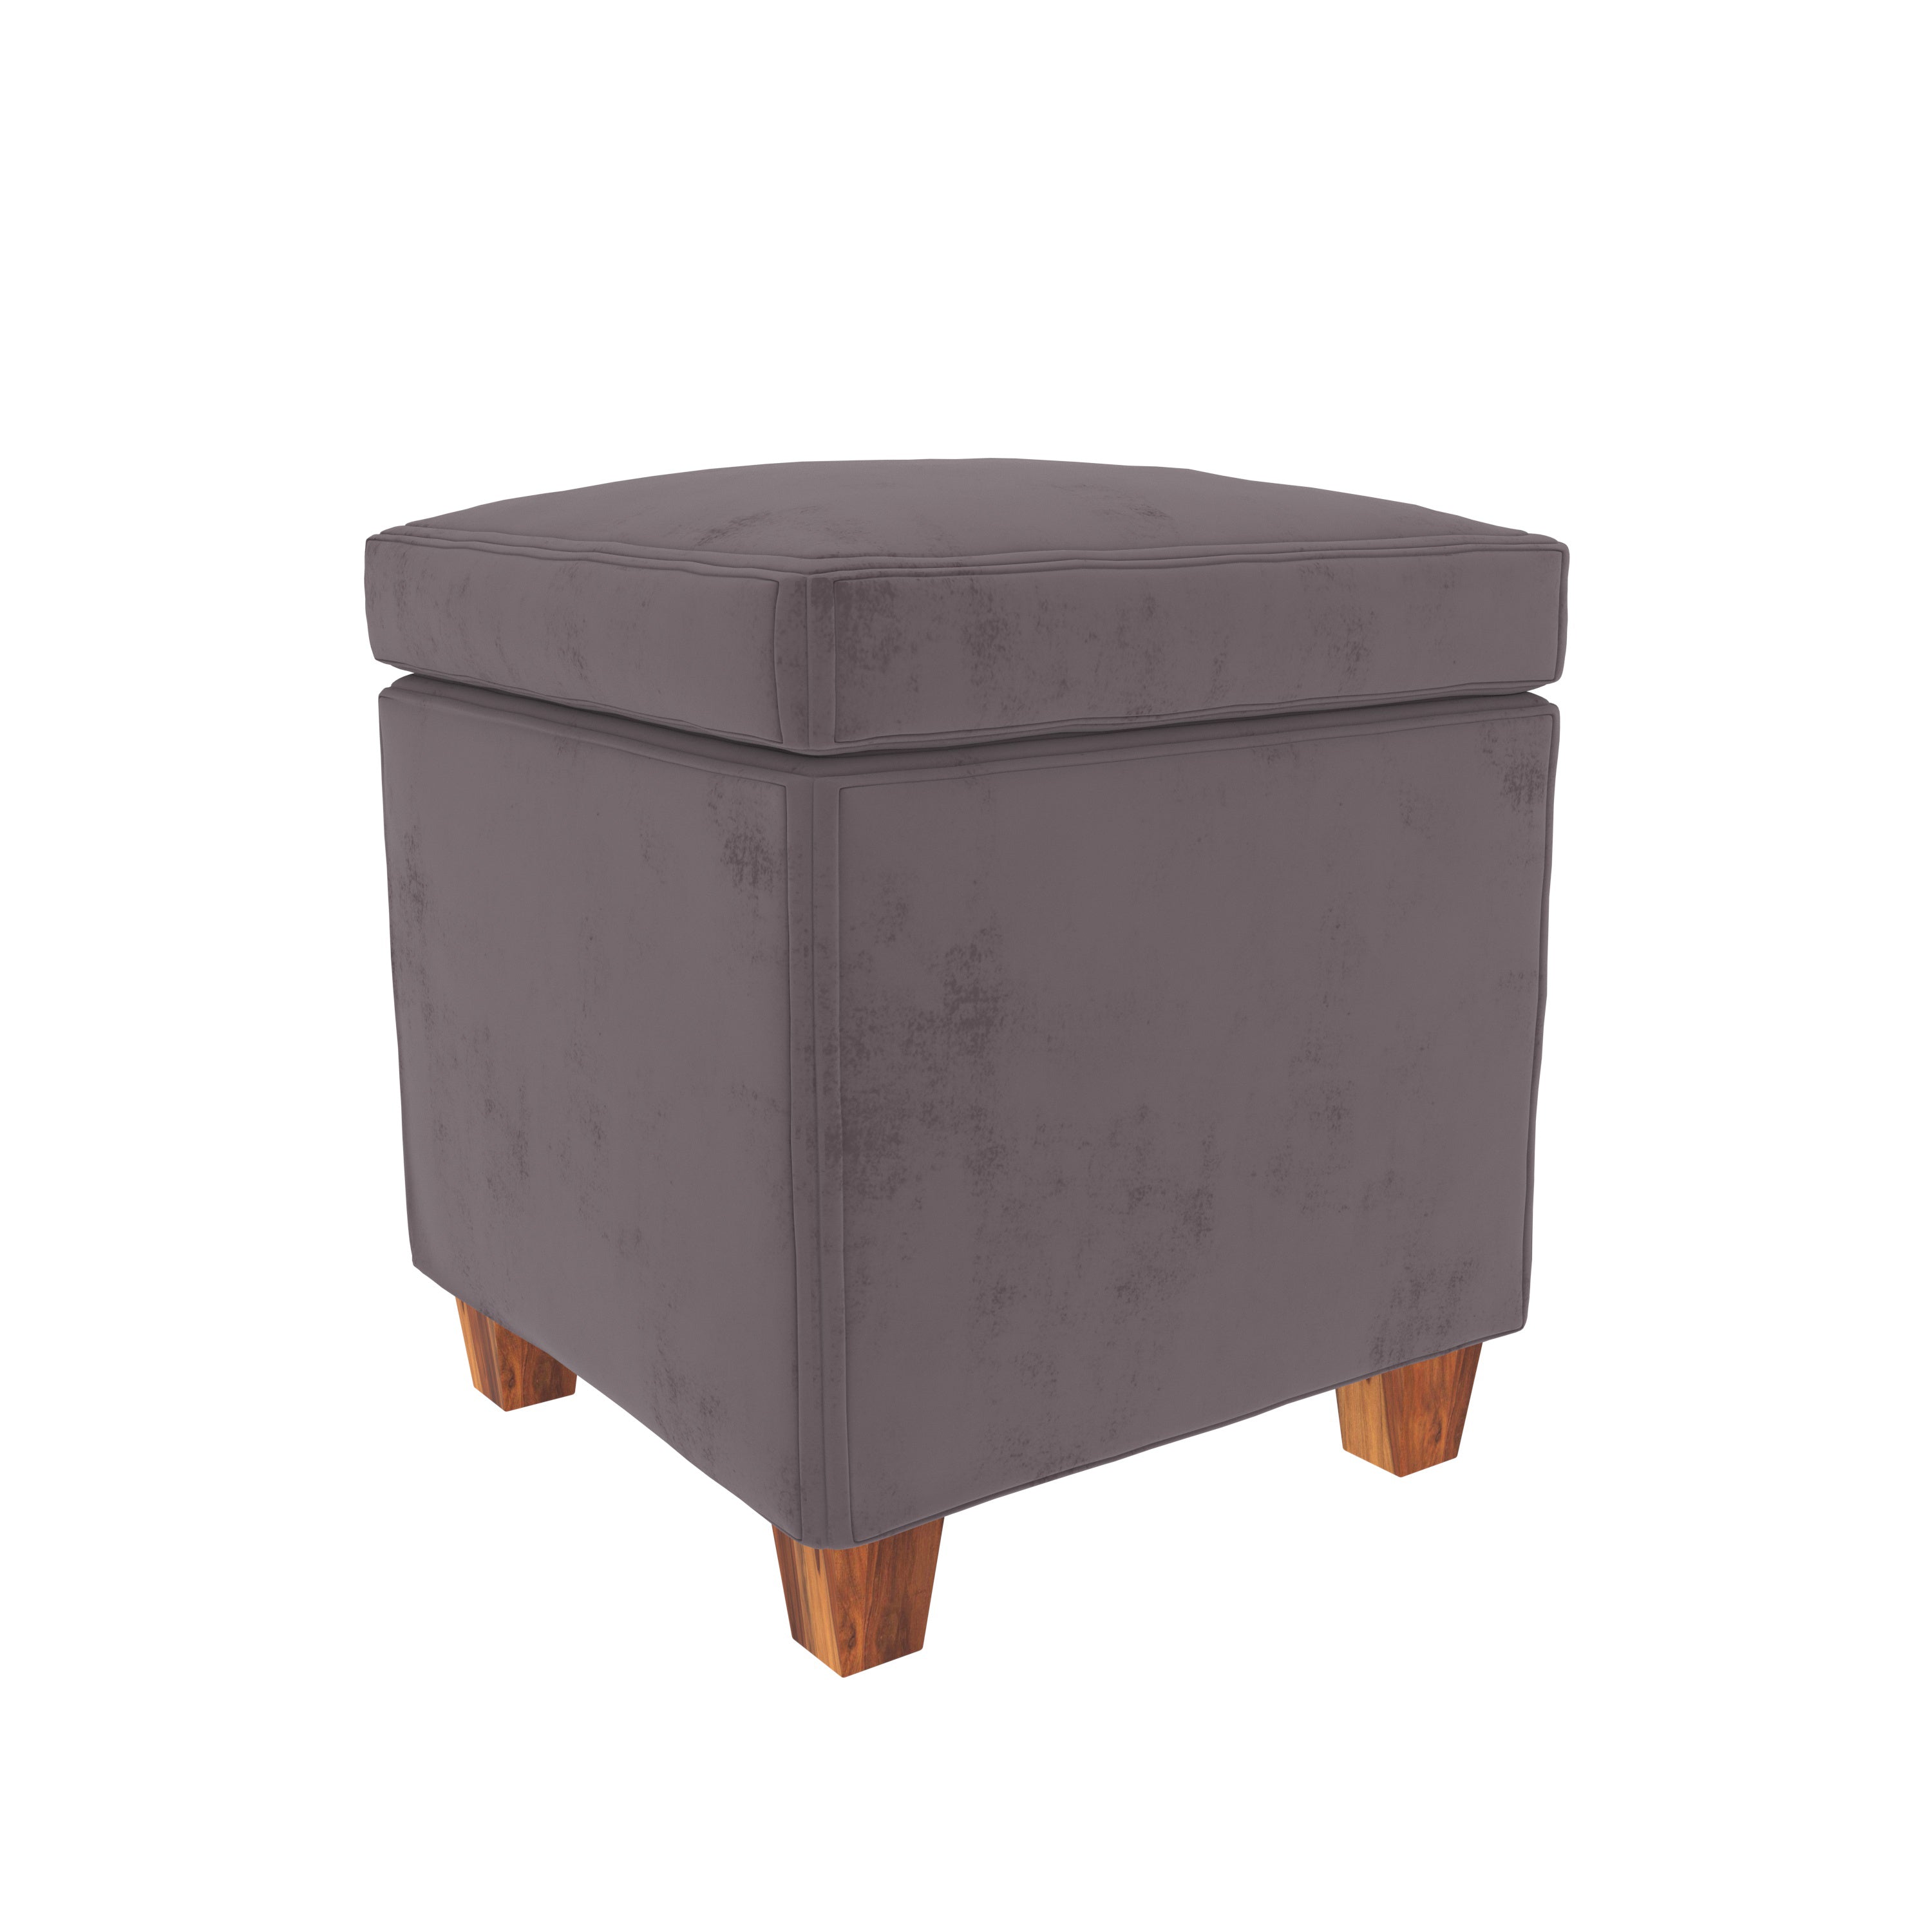 Melodious Truffle Gray Wooden Smooth Finish Light Seating Stool Pouf